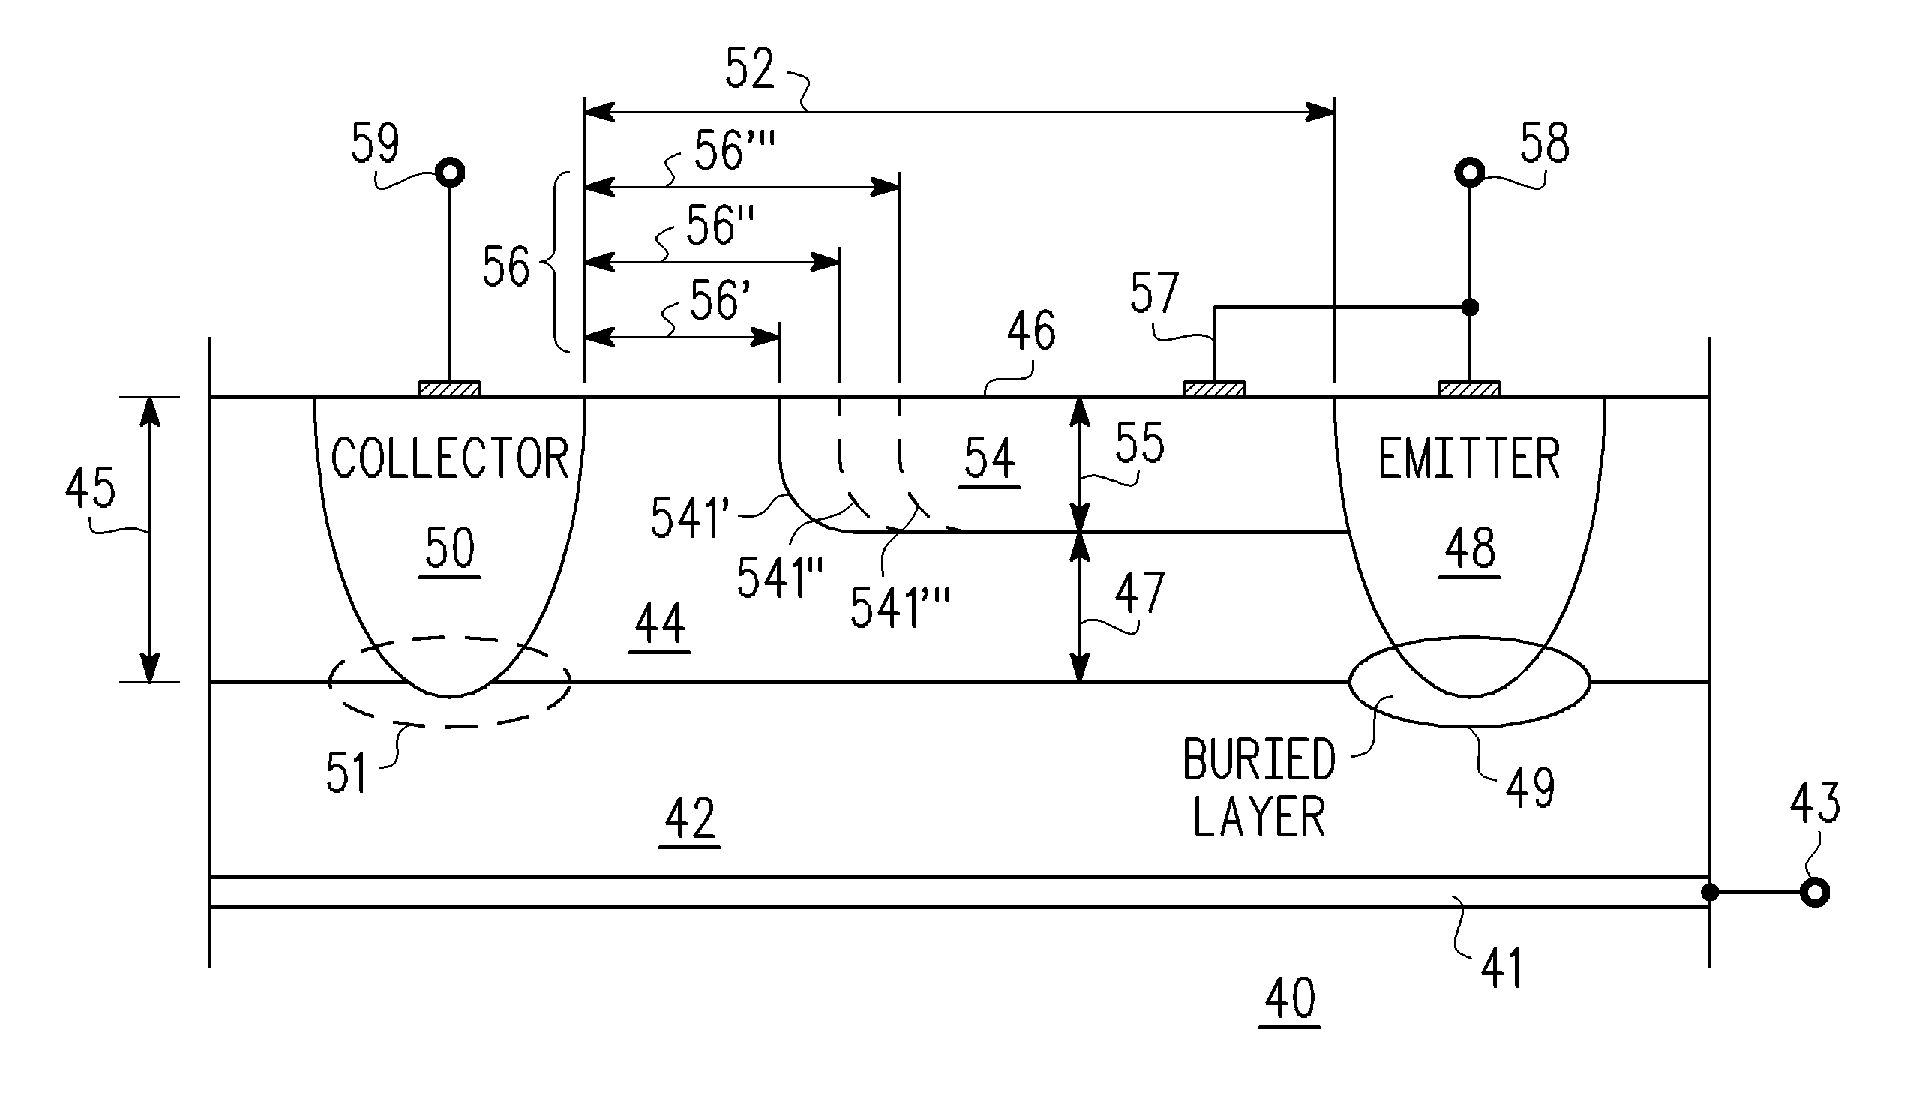 Buried asymmetric junction ESD protection device